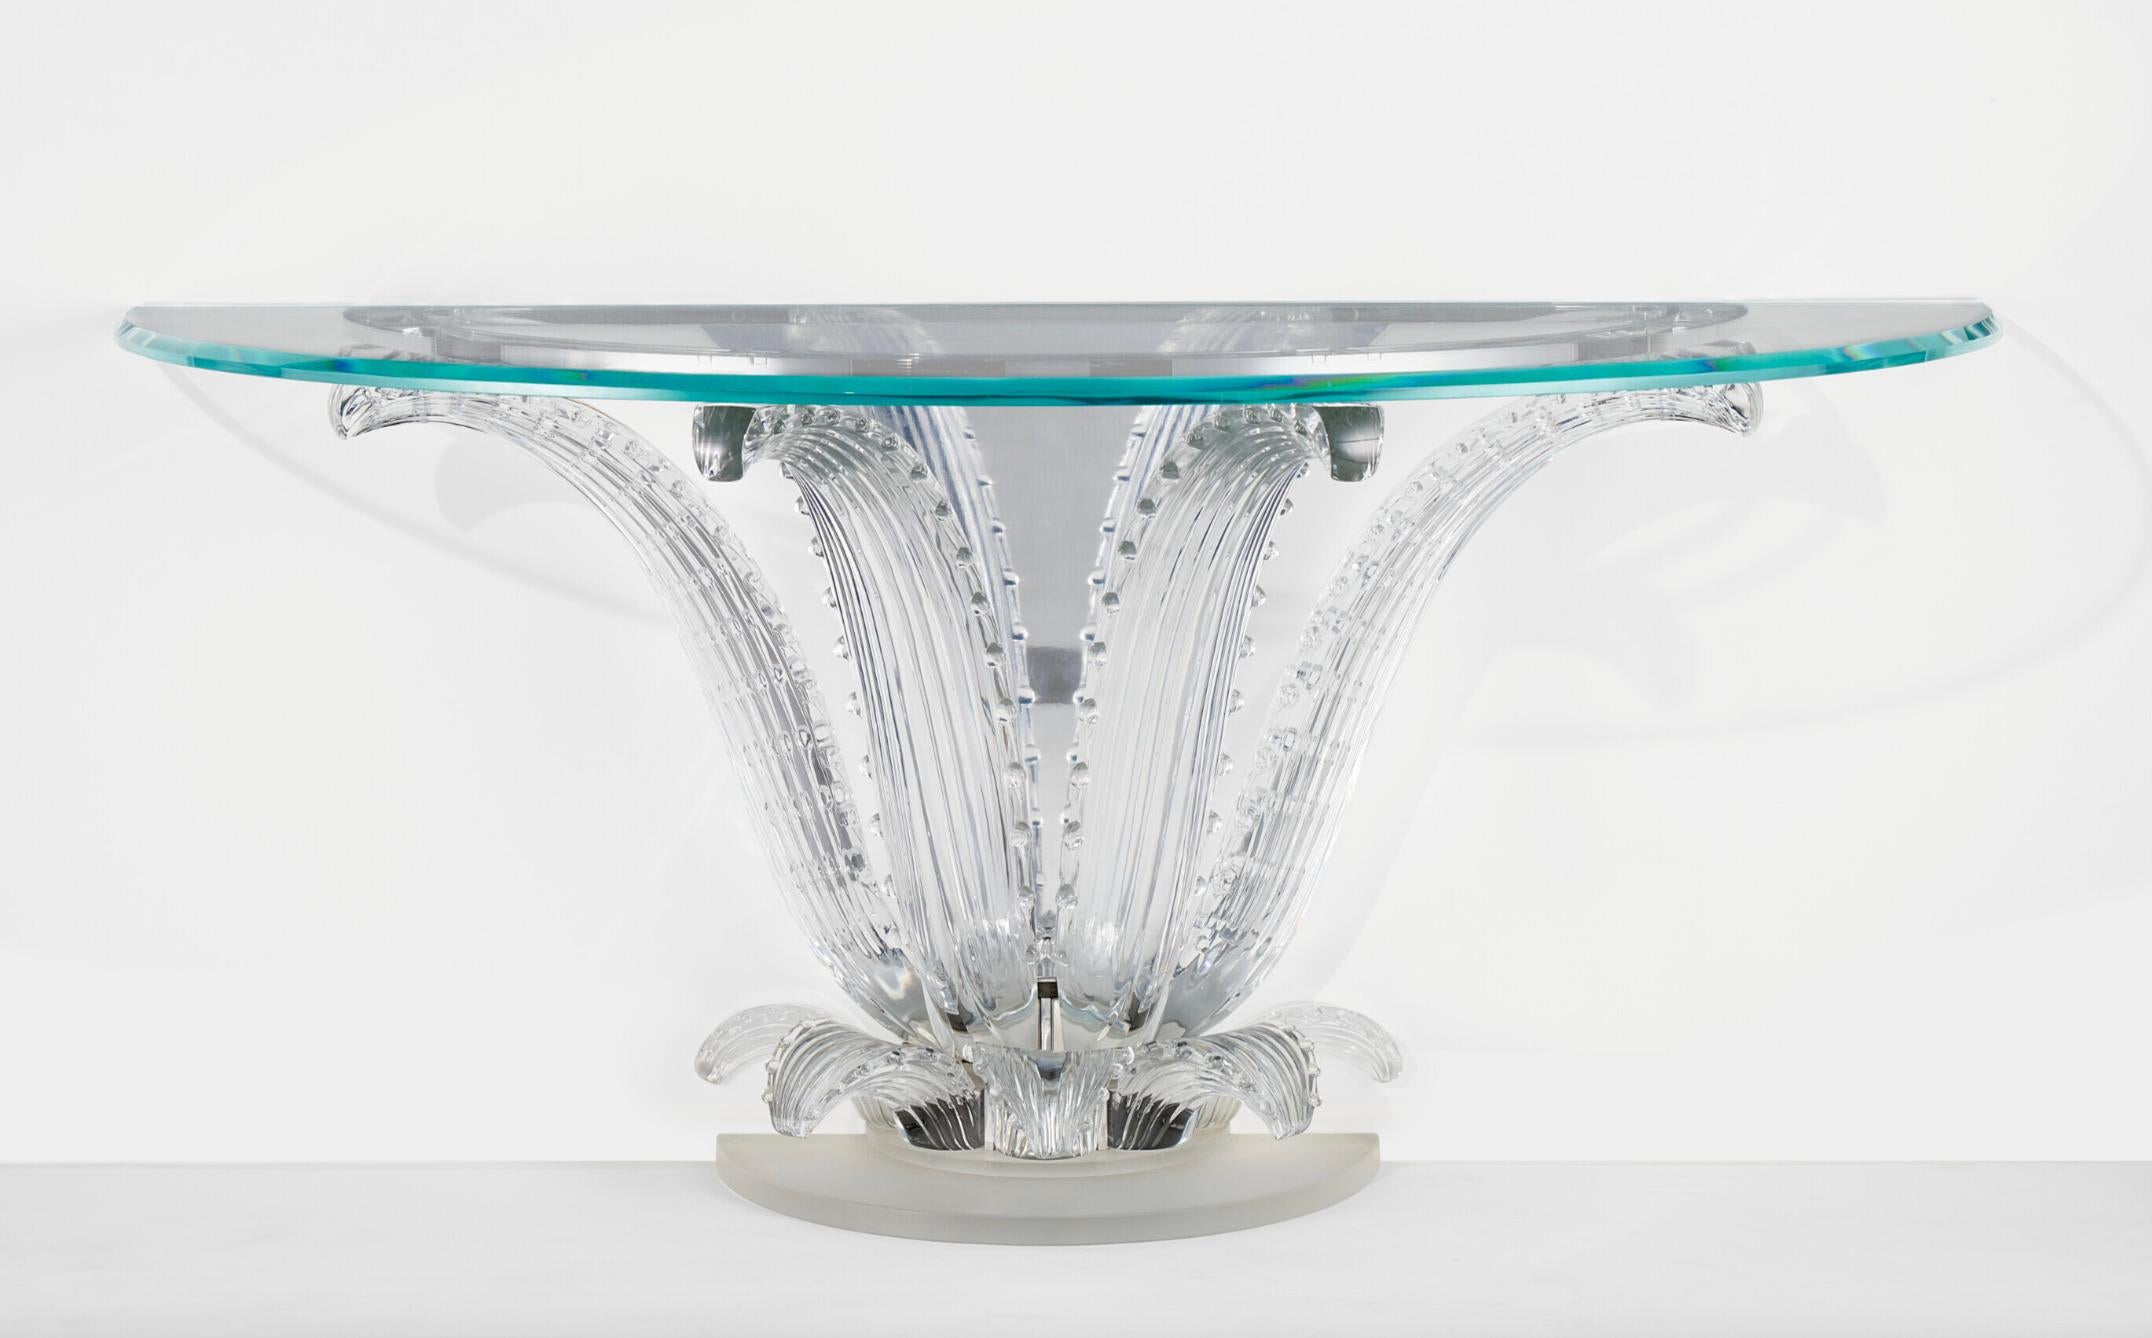 Lalique France, A Magnificent Pair of Crystal Cactus Console Tables

circa 1987 and 1988

These exquisite Lalique crystal cactus console tables are true statement pieces that exude luxury and sophistication. Originally designed by Marc Lalique